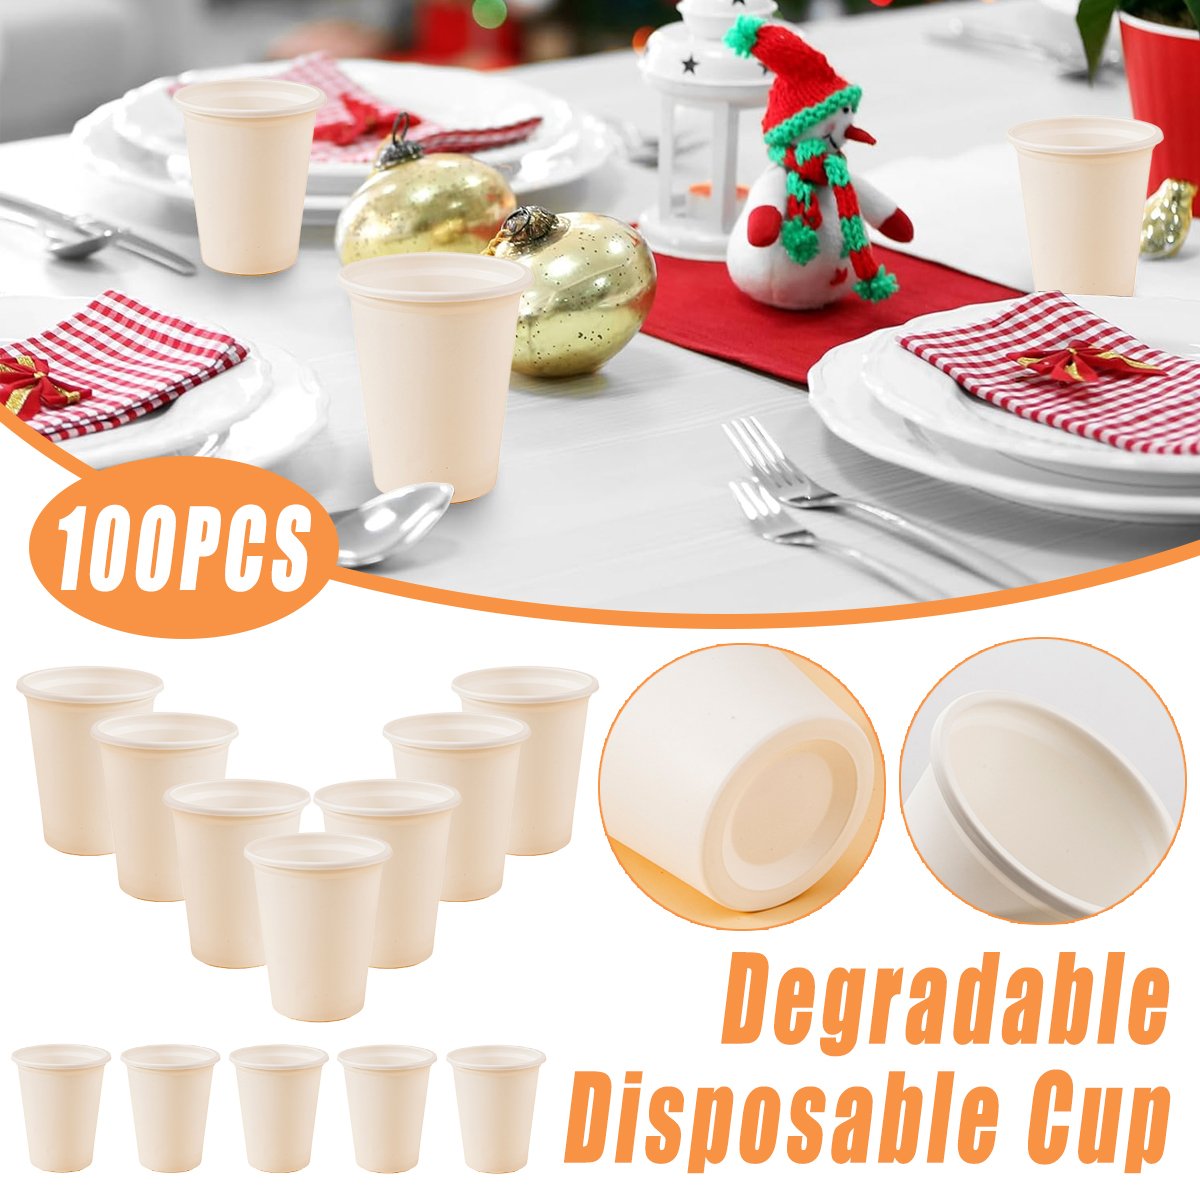 Eco-Friendly Convenience with Corn Starch Disposable Cups